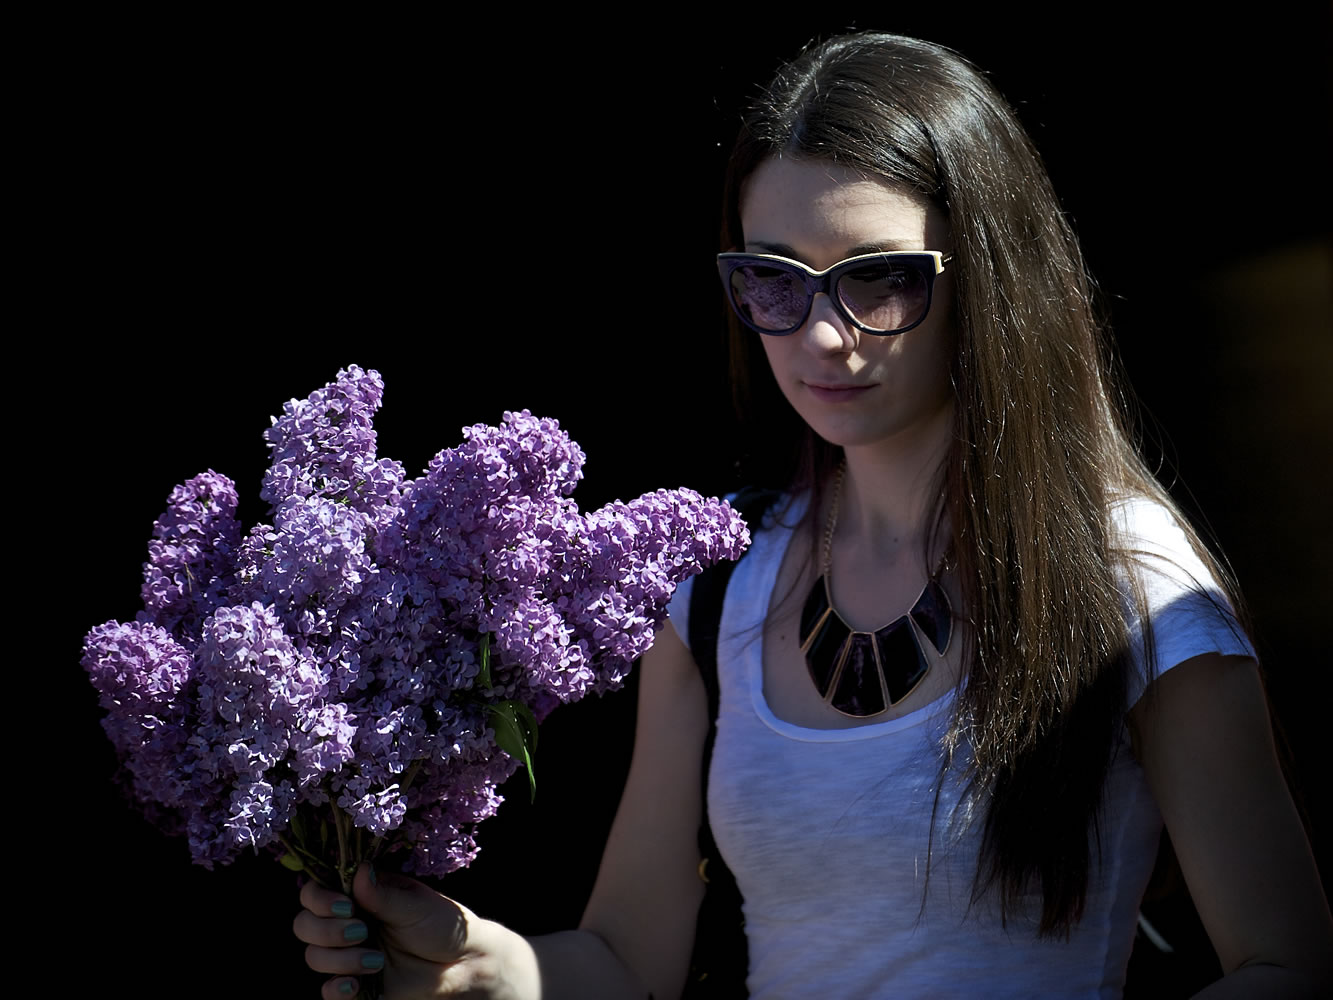 Anastasia Colesnic, 21, of Vancouver, holds a lilac bouquet that she planned to share with a friend during Lilac Days in Woodland.